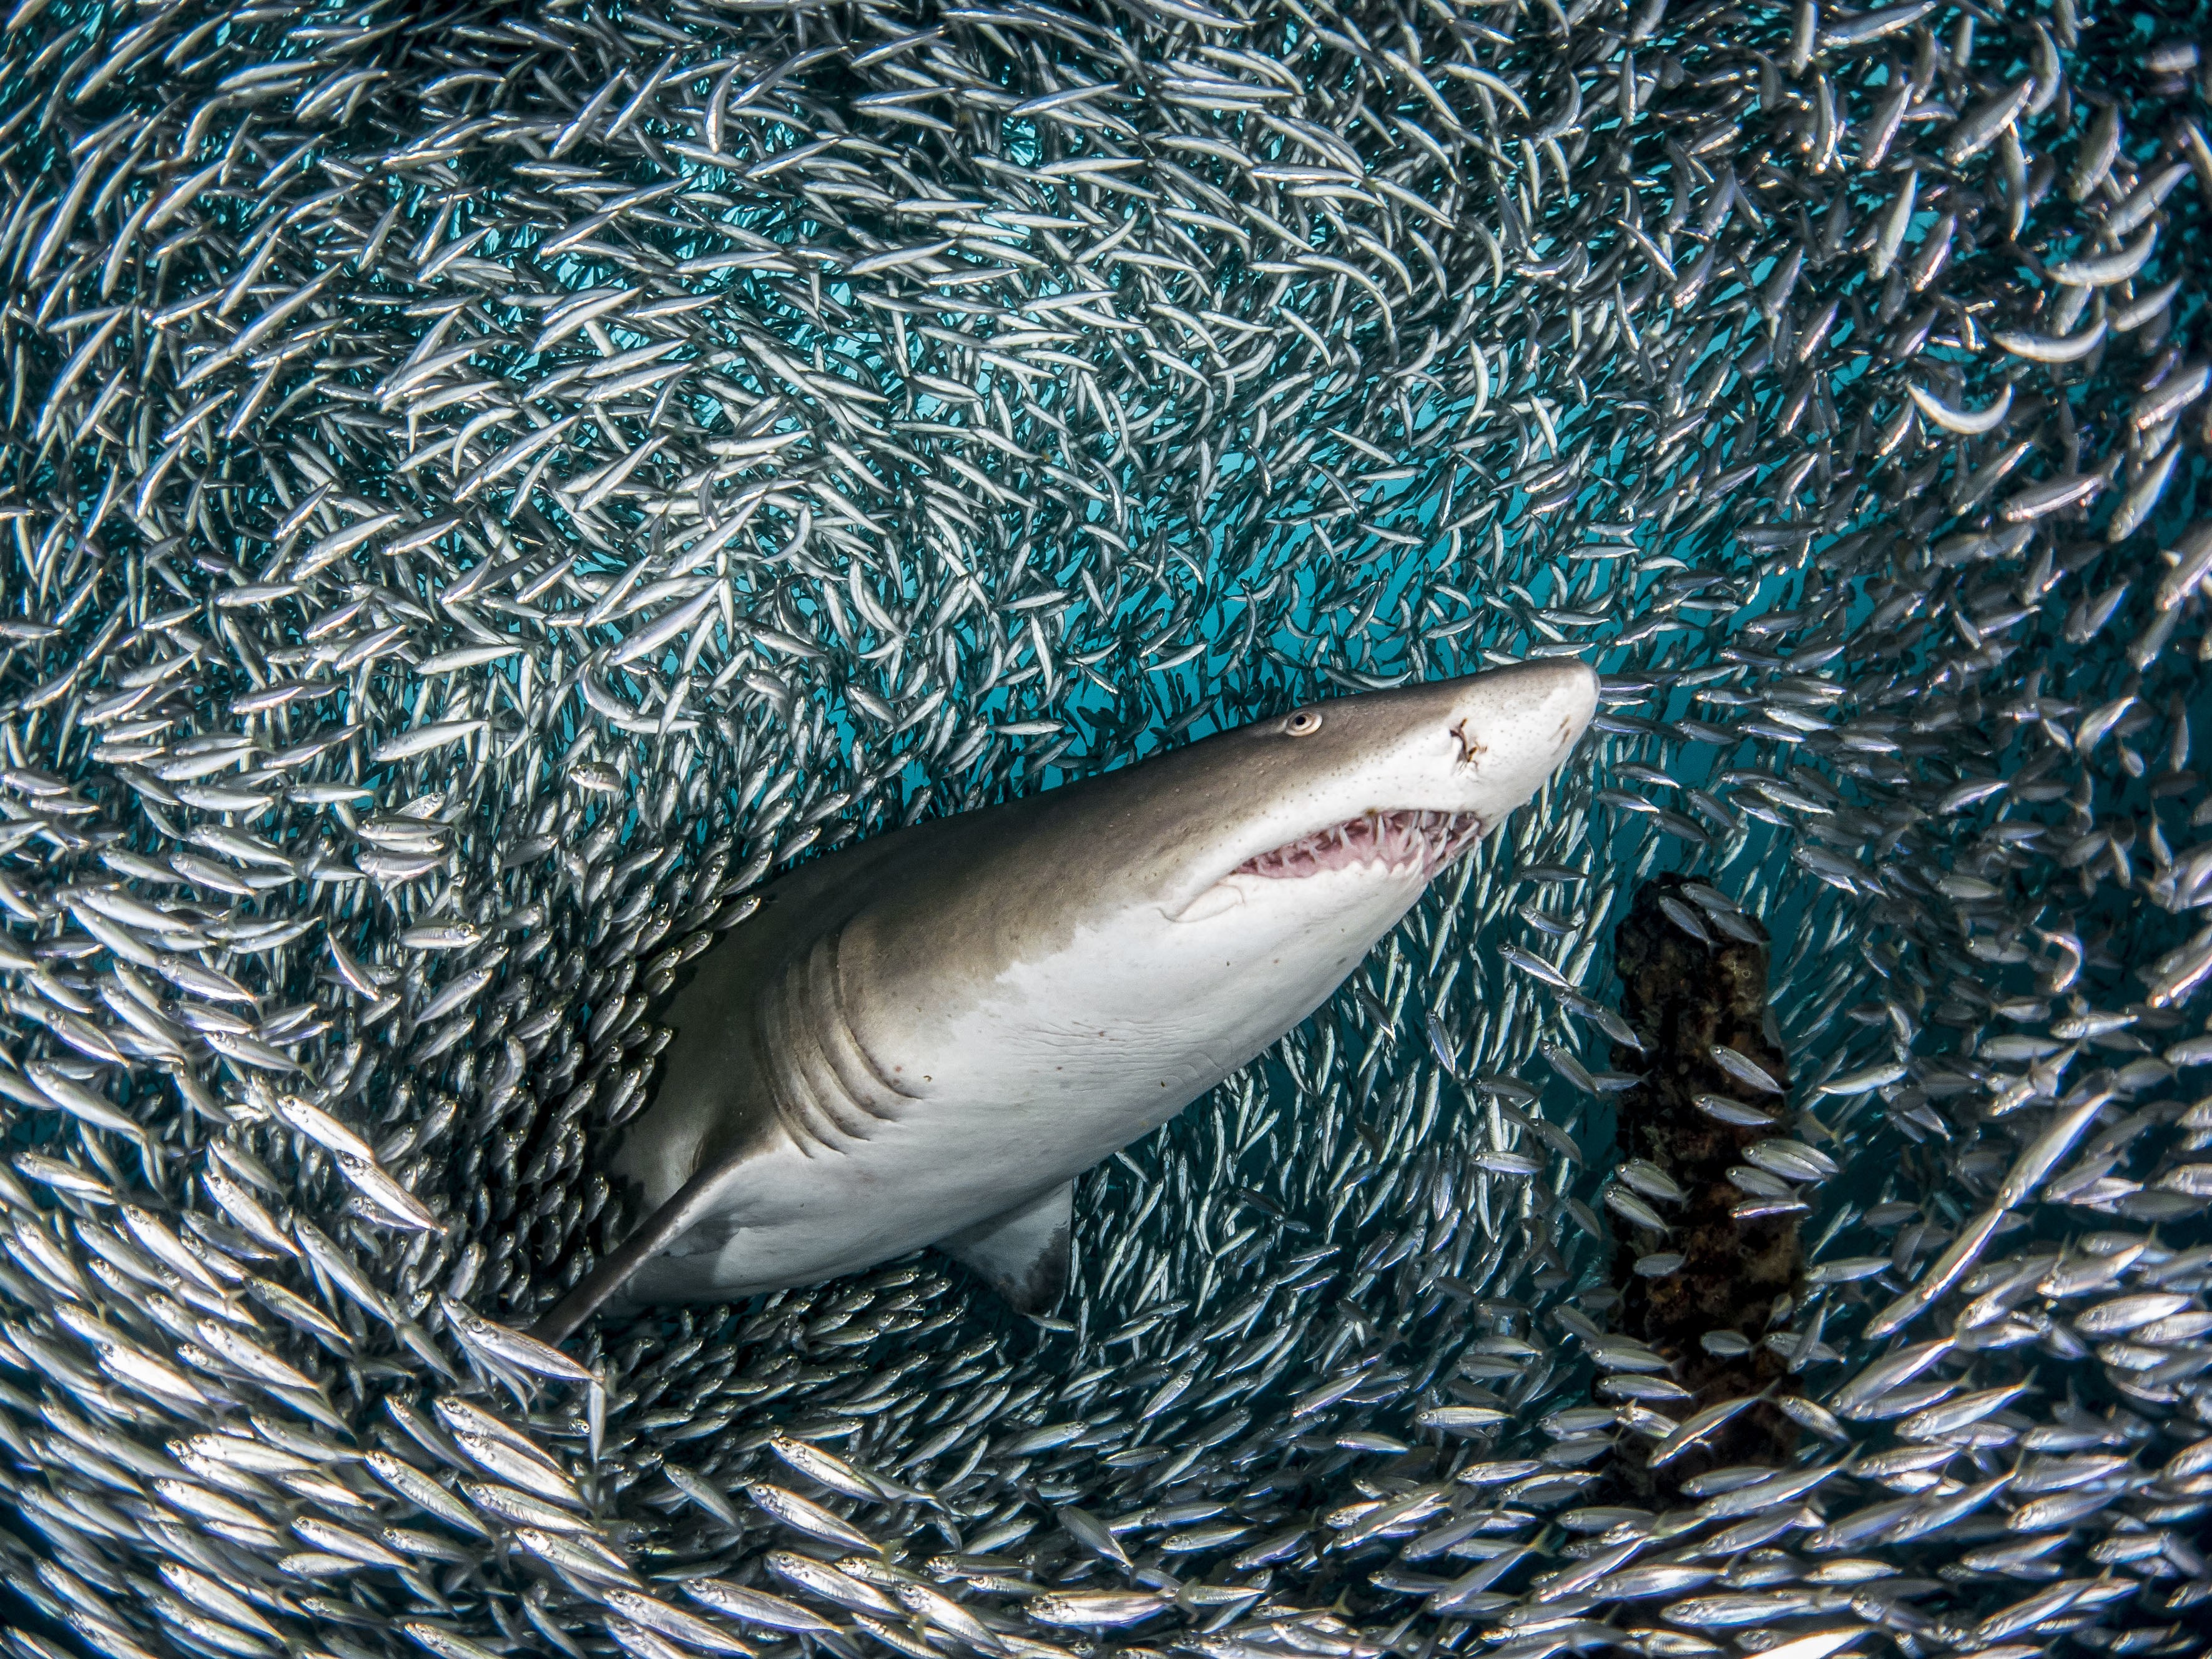 This Huge Sand Tiger Shark Ain't Got No Time for Puny Fish | WIRED